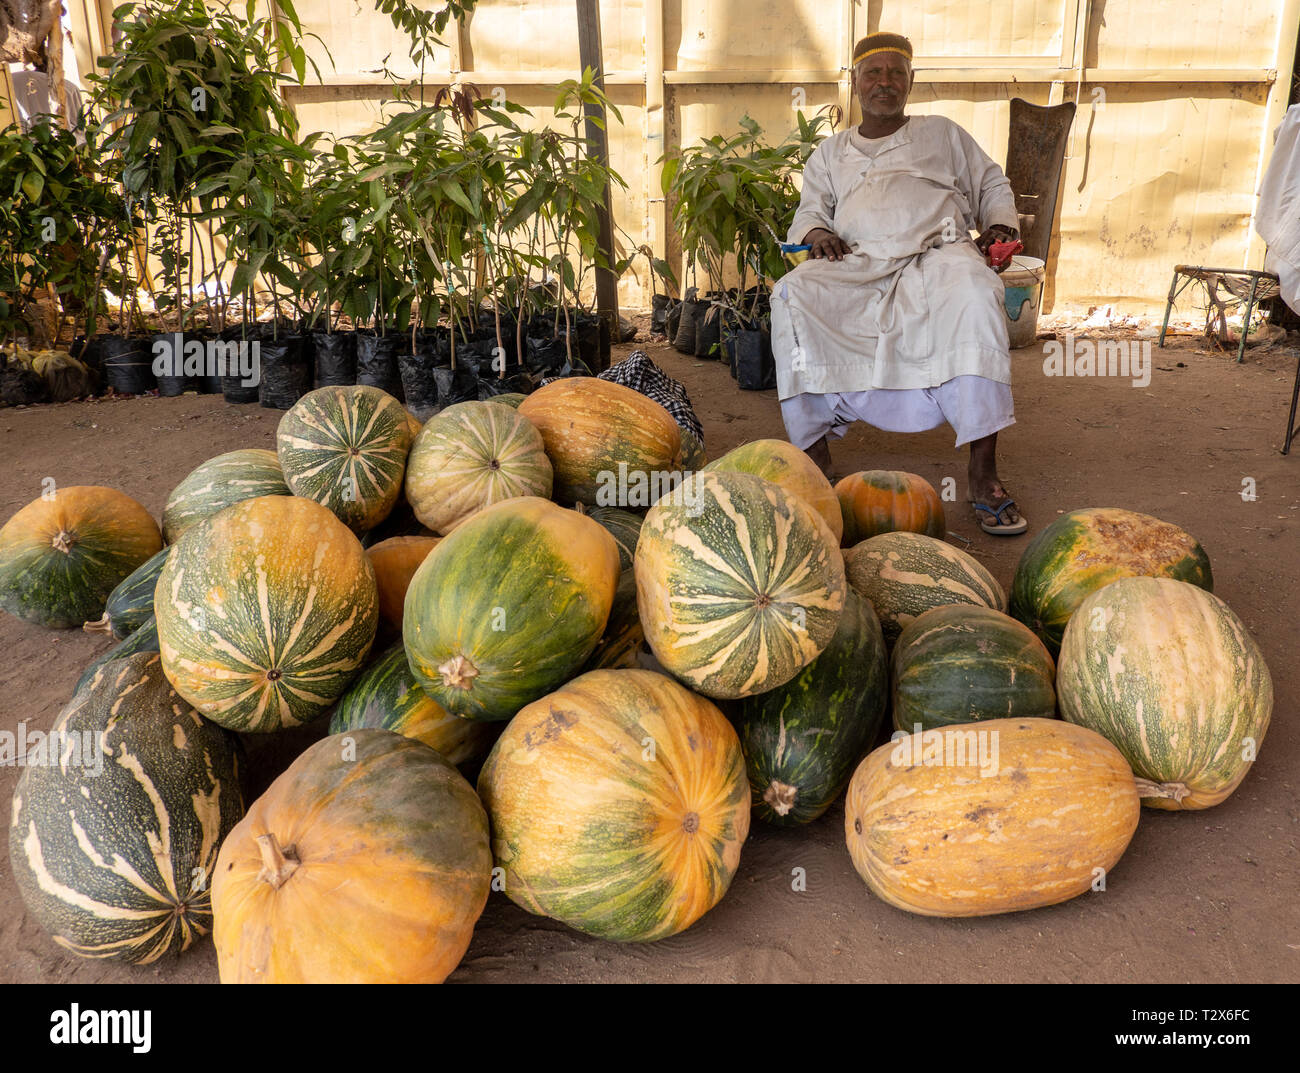 Nuri, Sudan, February 9., 2019: A pumpkin seller in a white caftan sits on a chair in front of his pumpkins at the market Stock Photo